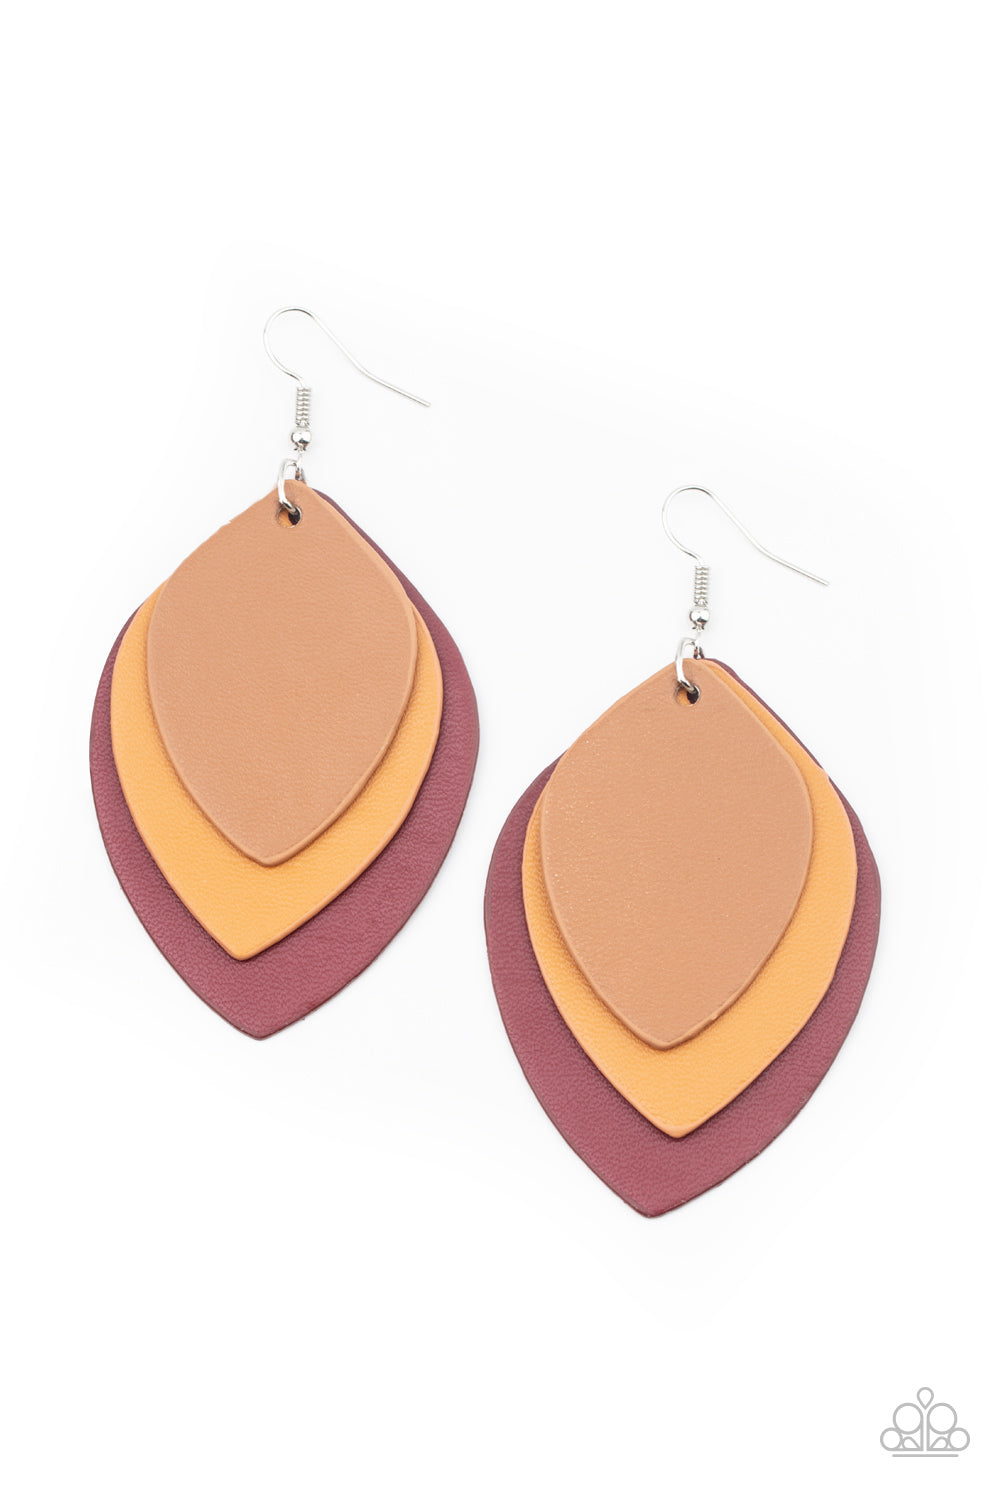 Paparazzi Light as a LEATHER - Red Earrings - A Finishing Touch 